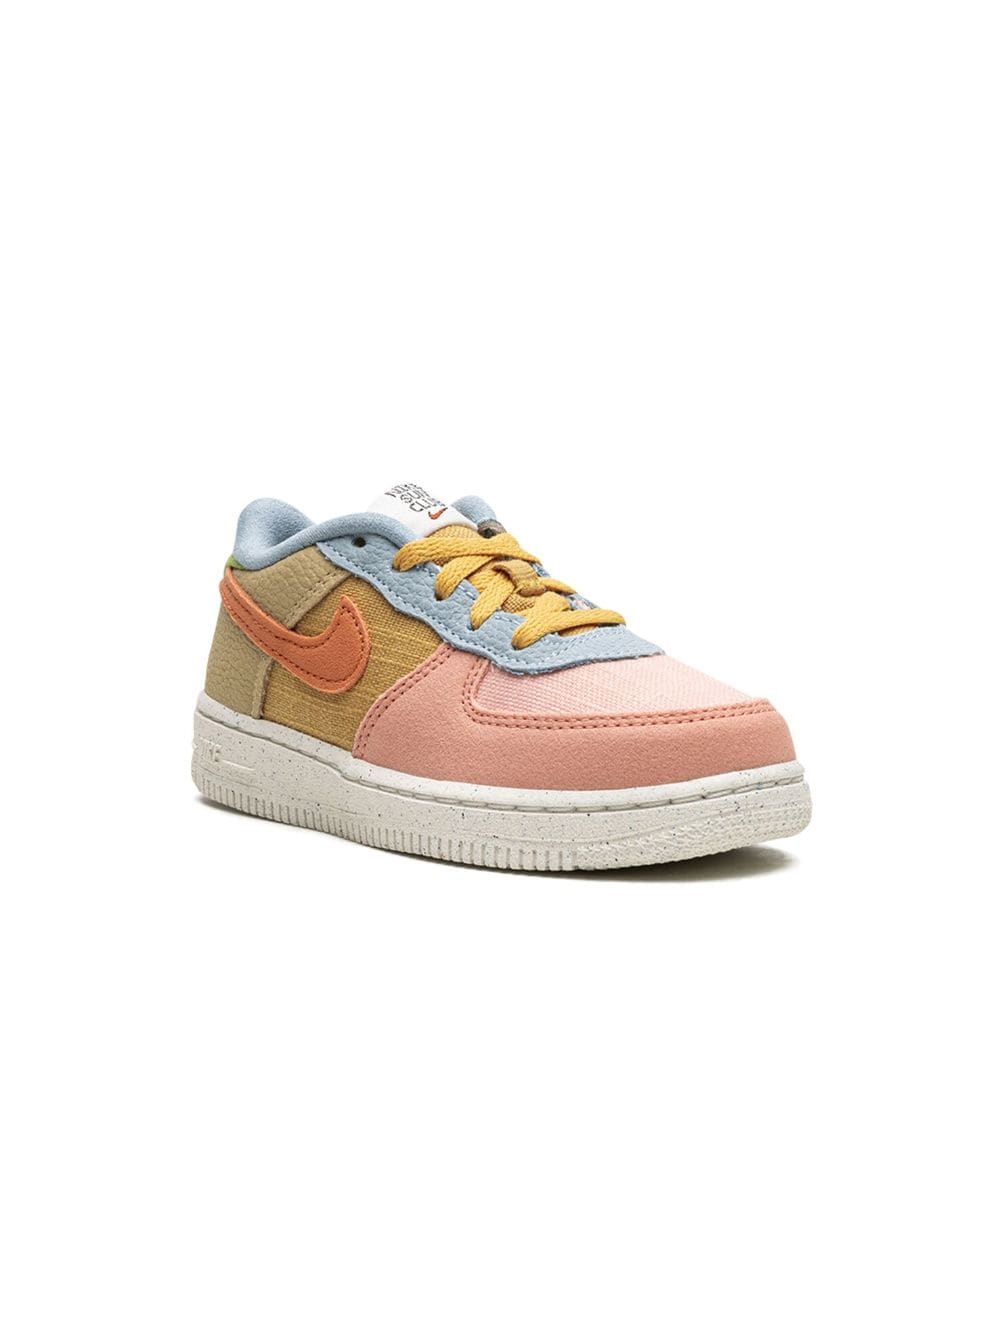 Little Kid's Nike Force 1 LV8 Next Nature Sanded Gold/Hot Curry (DM1008  700) - 2.5 